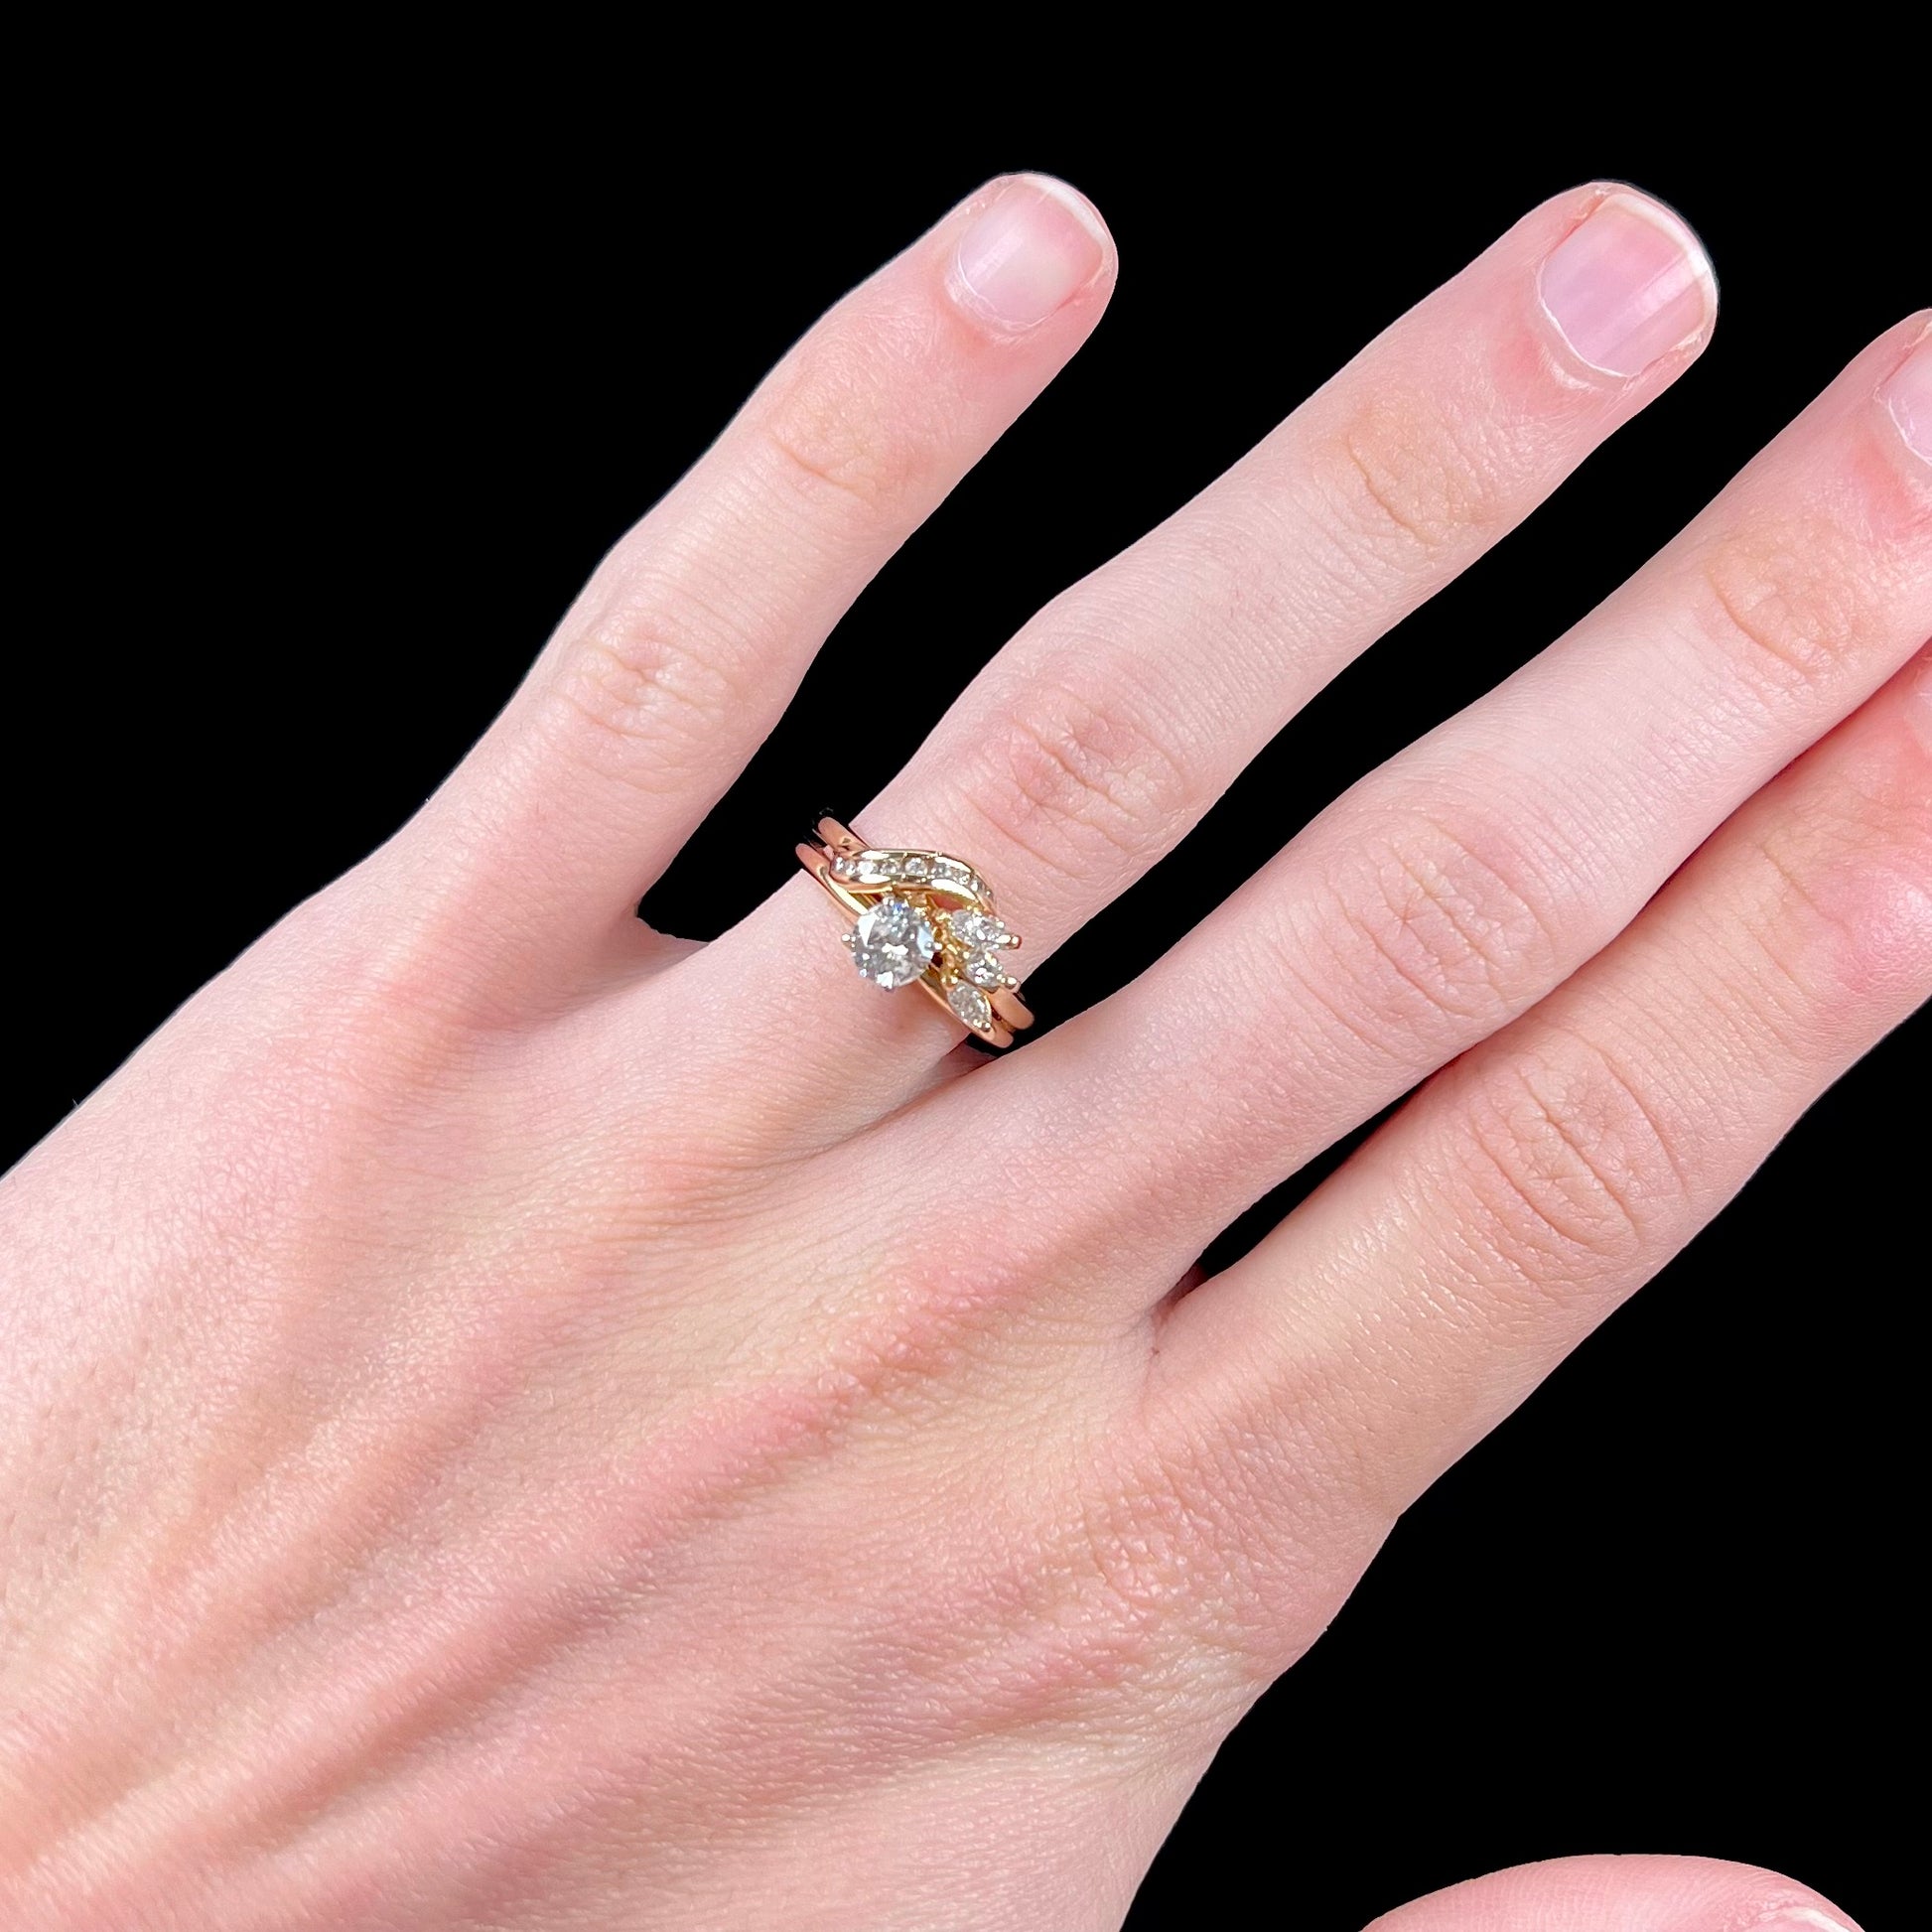 A ladies' diamond wedding set that has been soldered together in yellow gold.  There are round and marquise cut diamonds.